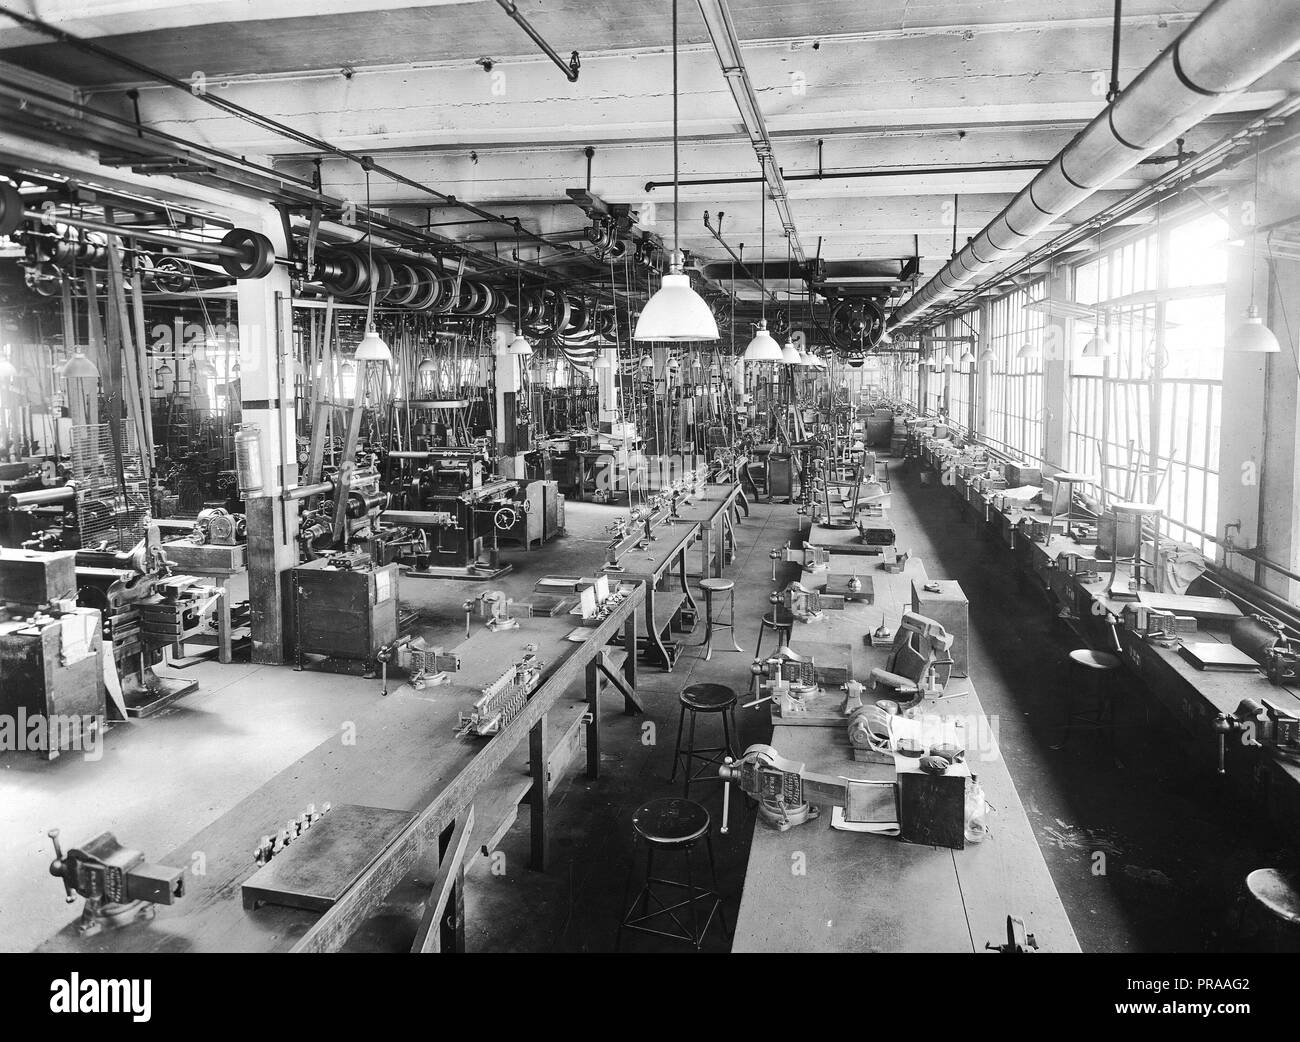 1918 - Alien Property Custodian - Property Seized - Eiseman Magneto Company, Brooklyn, N.Y., taken over by Alien Property Custodian. General machine shop, middle section looking west Stock Photo